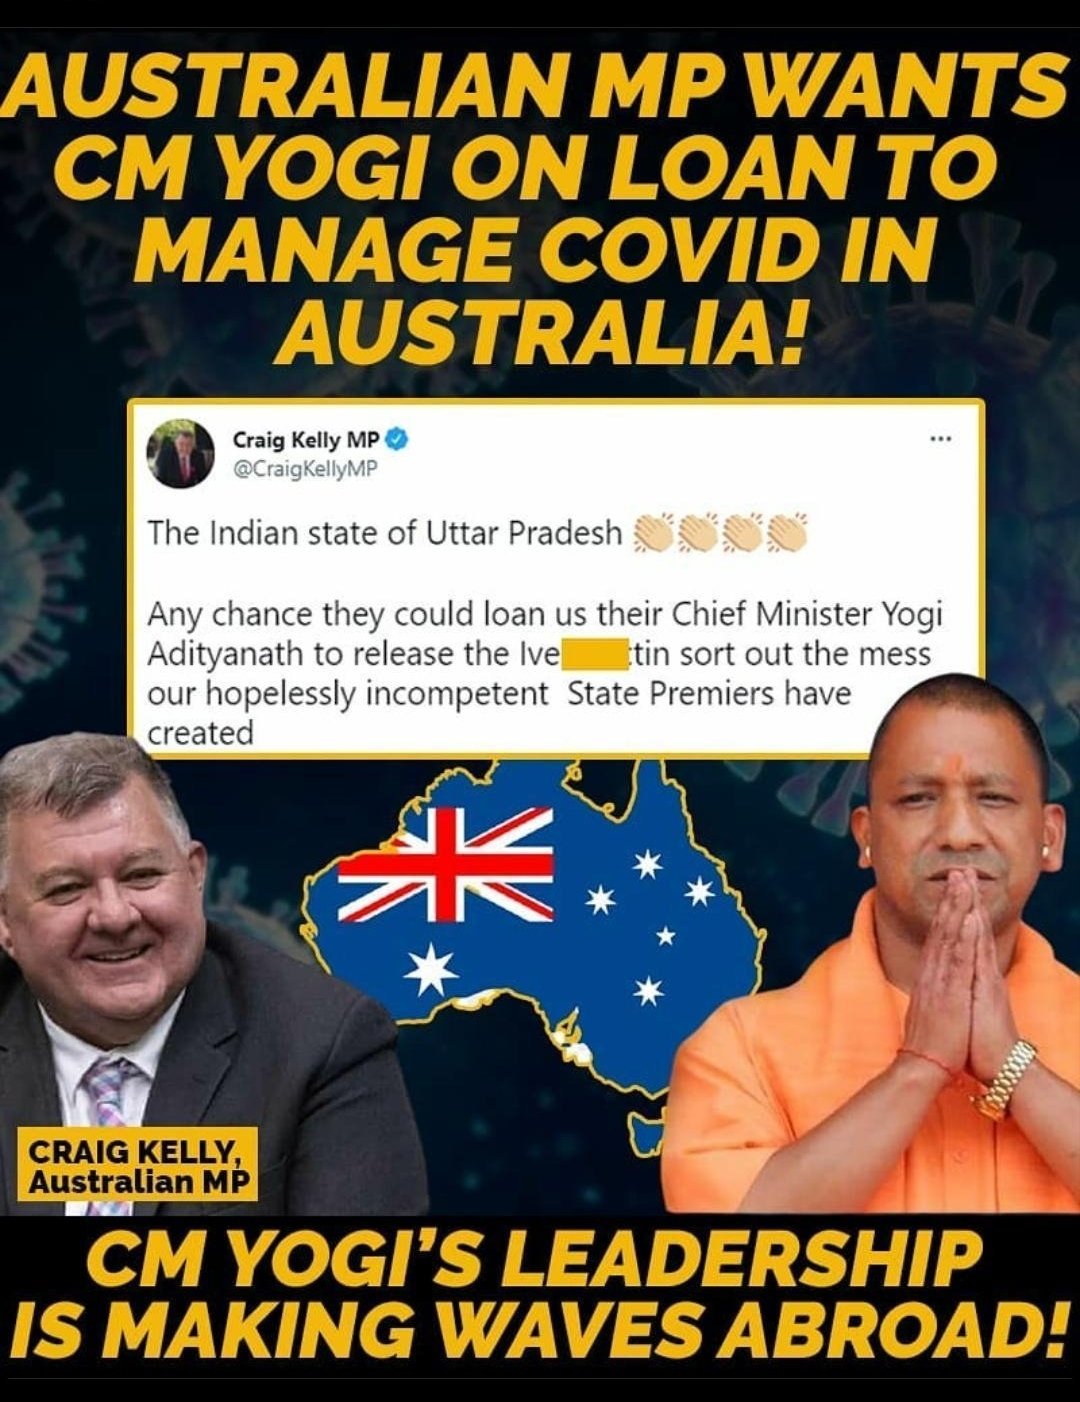 mål jøde Monica Drunk Journalist on Twitter: "There is this news that's being spread  claiming Australian MP wants UP CM Yogi Adityanath to manage Covid in  Australia. Let see the exact truth about this tweet